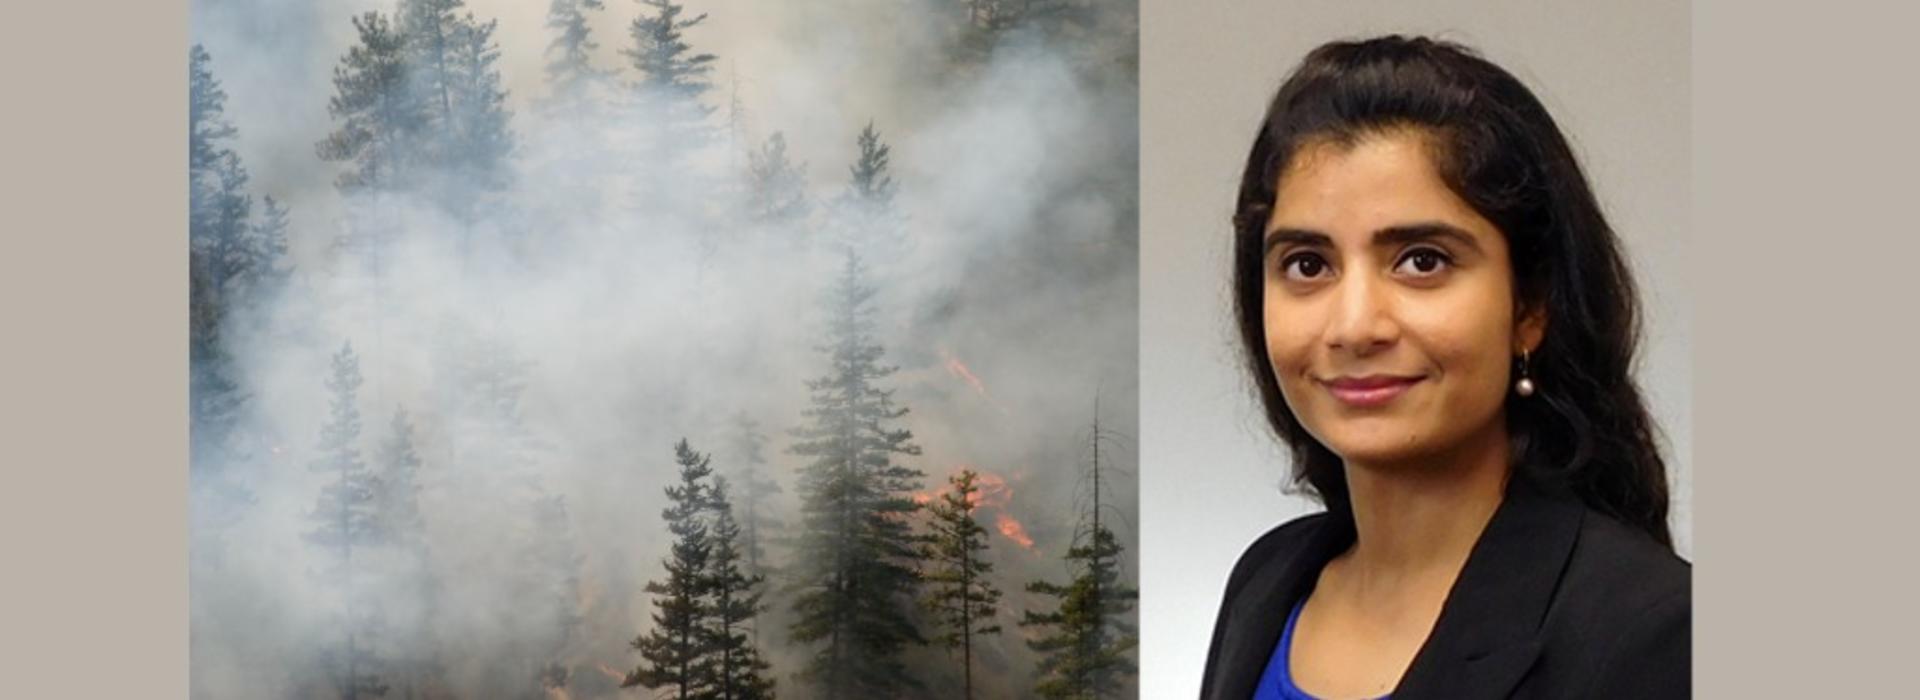 Alt text: On the left, fire in a pine forest. On the right, headshot of Dr. Laalitha Surapaneni. Credit: Getty Images and University of Minnesota.